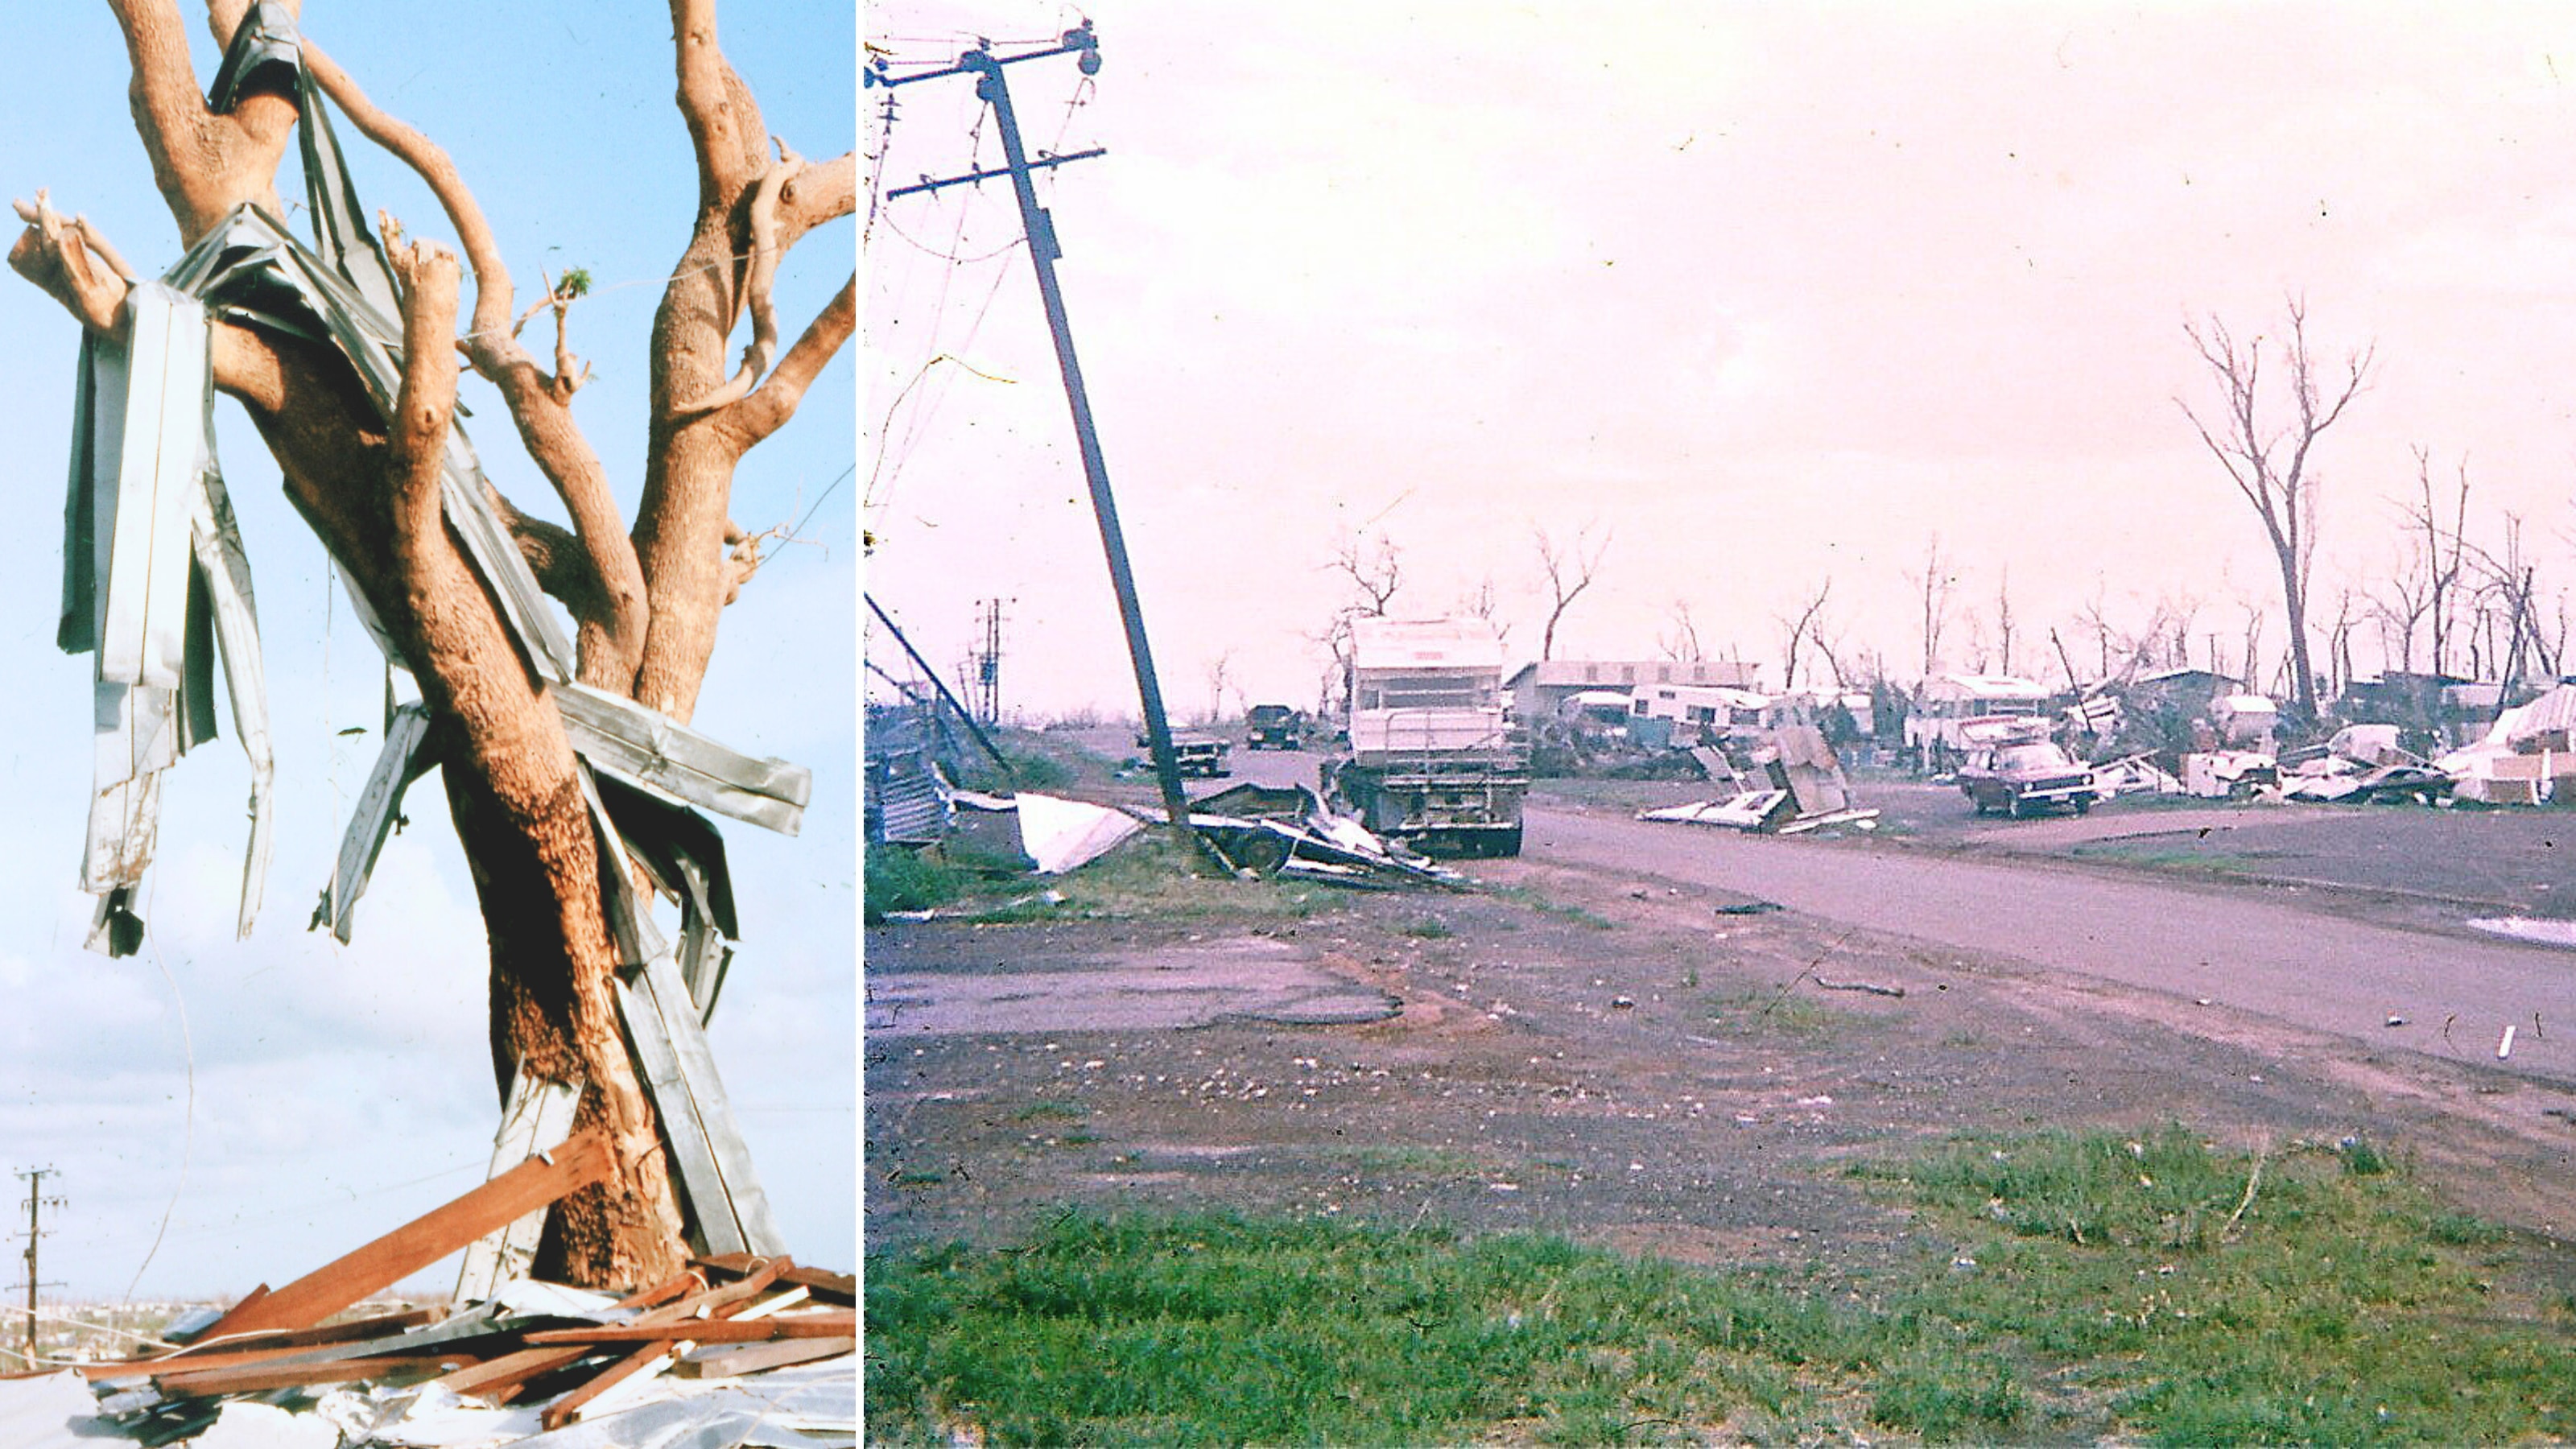 A wide shot of a caravan park with destroyed caravans. Tall trees with no leaves wrapped in sheets of corrugated iron